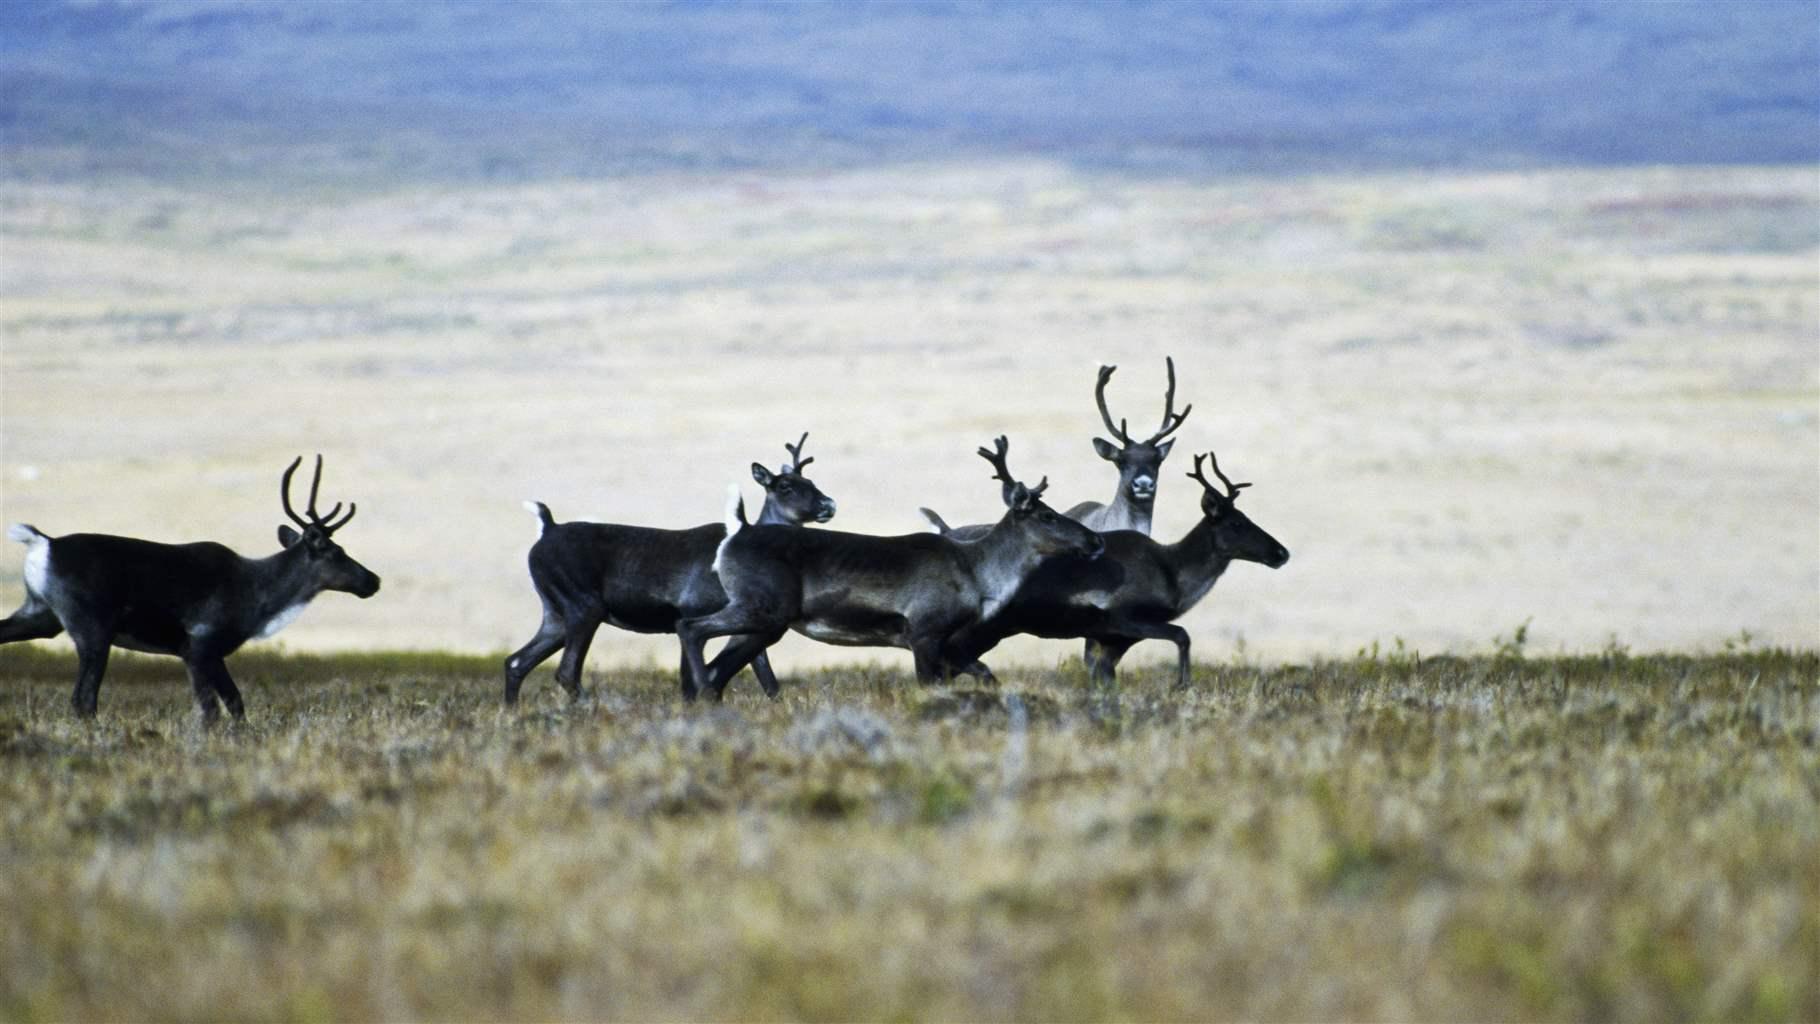 Five caribou walk together through golden prairie grasses in the Northwest Territories. One caribou with large antlers looks toward the camera.